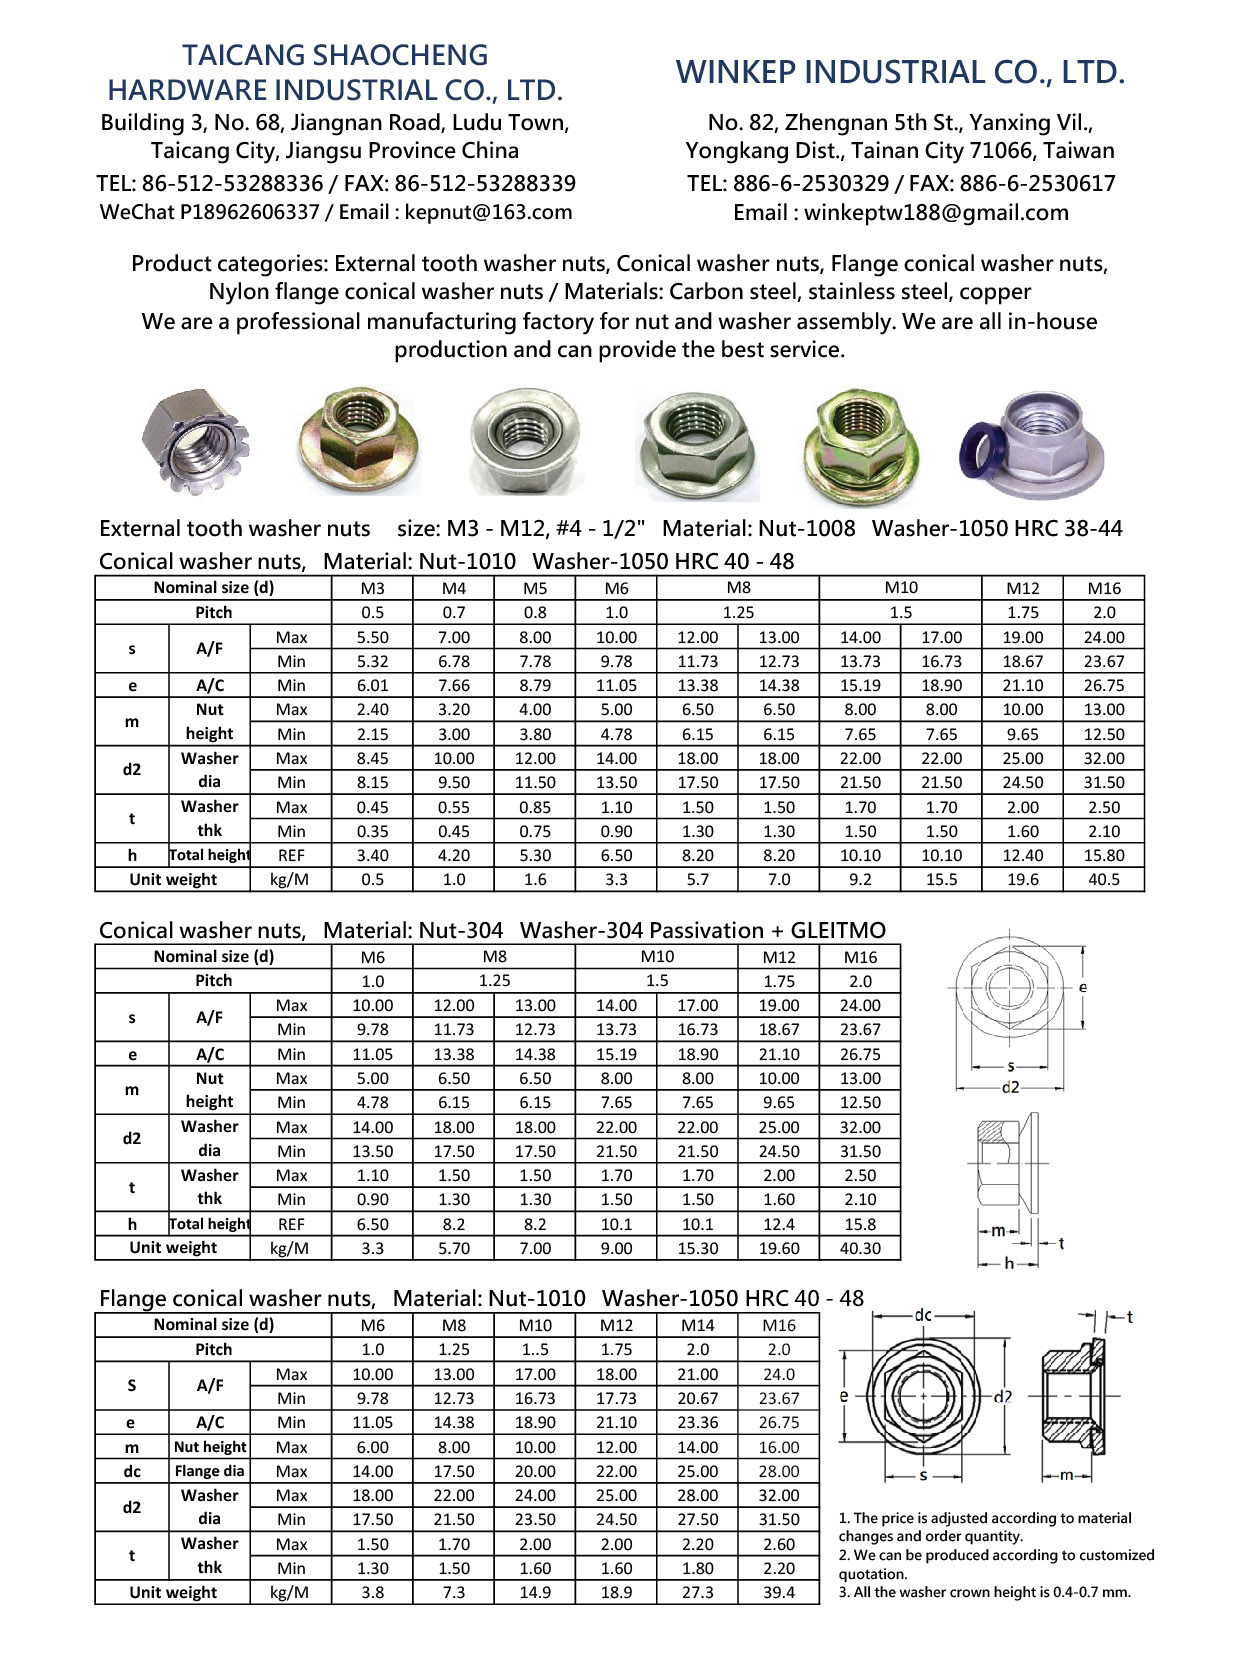 WINKEP INDUSTRIAL CO., LTD. , External tooth washer nuts, Conical washer nuts, Flange conical washer nuts, Nylon flange conical washer nuts 